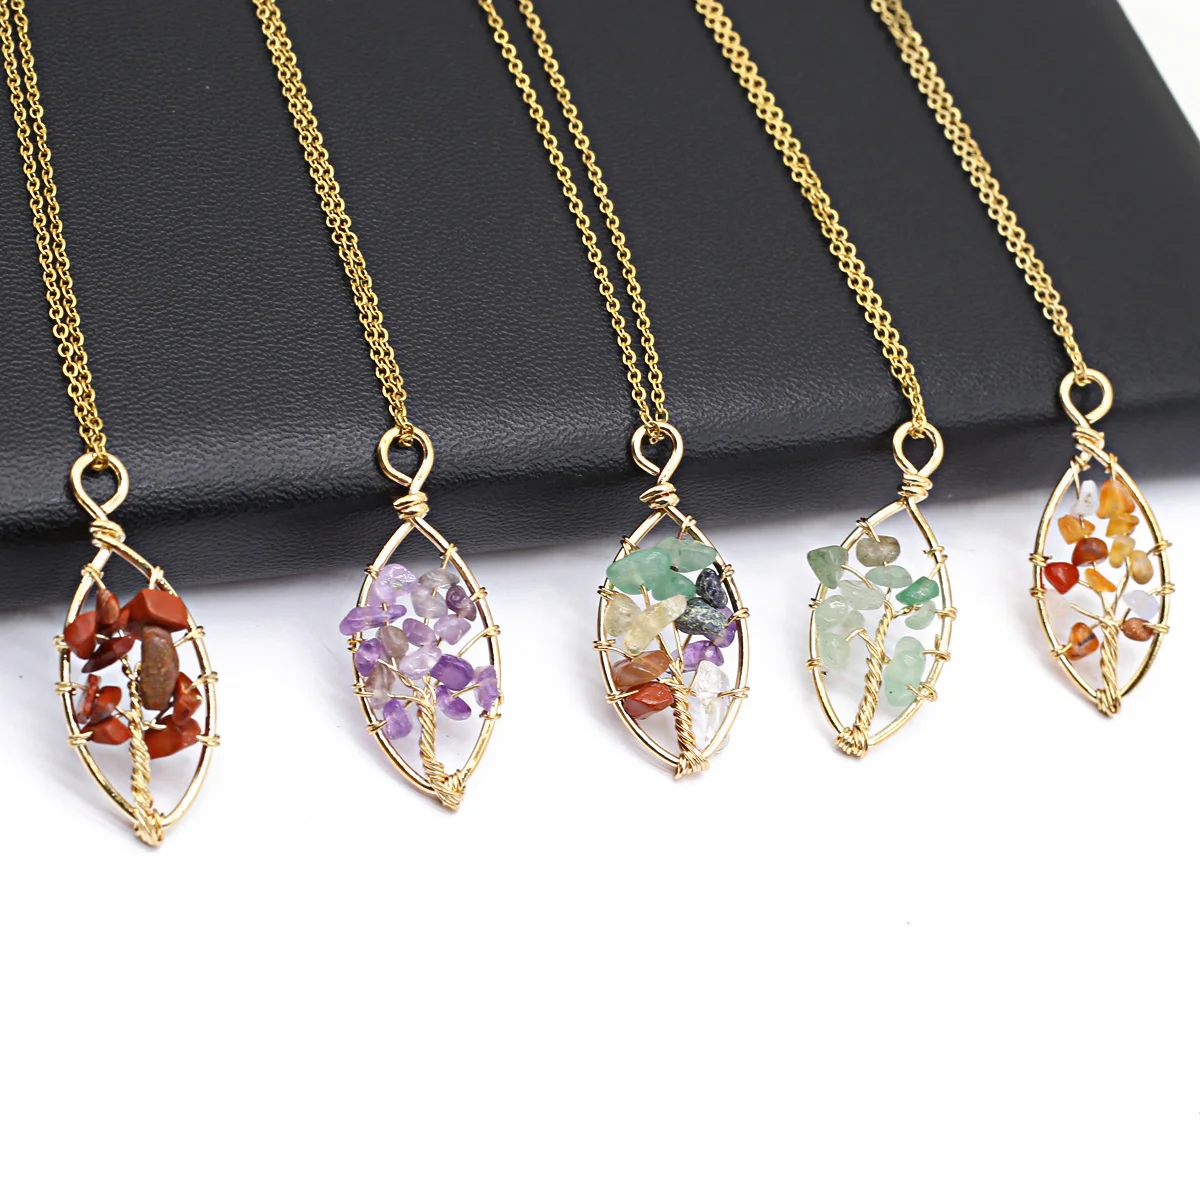 

Natural Semiprecious Stone Hand Wrapped Crushed Stone Life Tree Leaf Shape Pendant Necklace Spiritual Healing Jewelry Gift